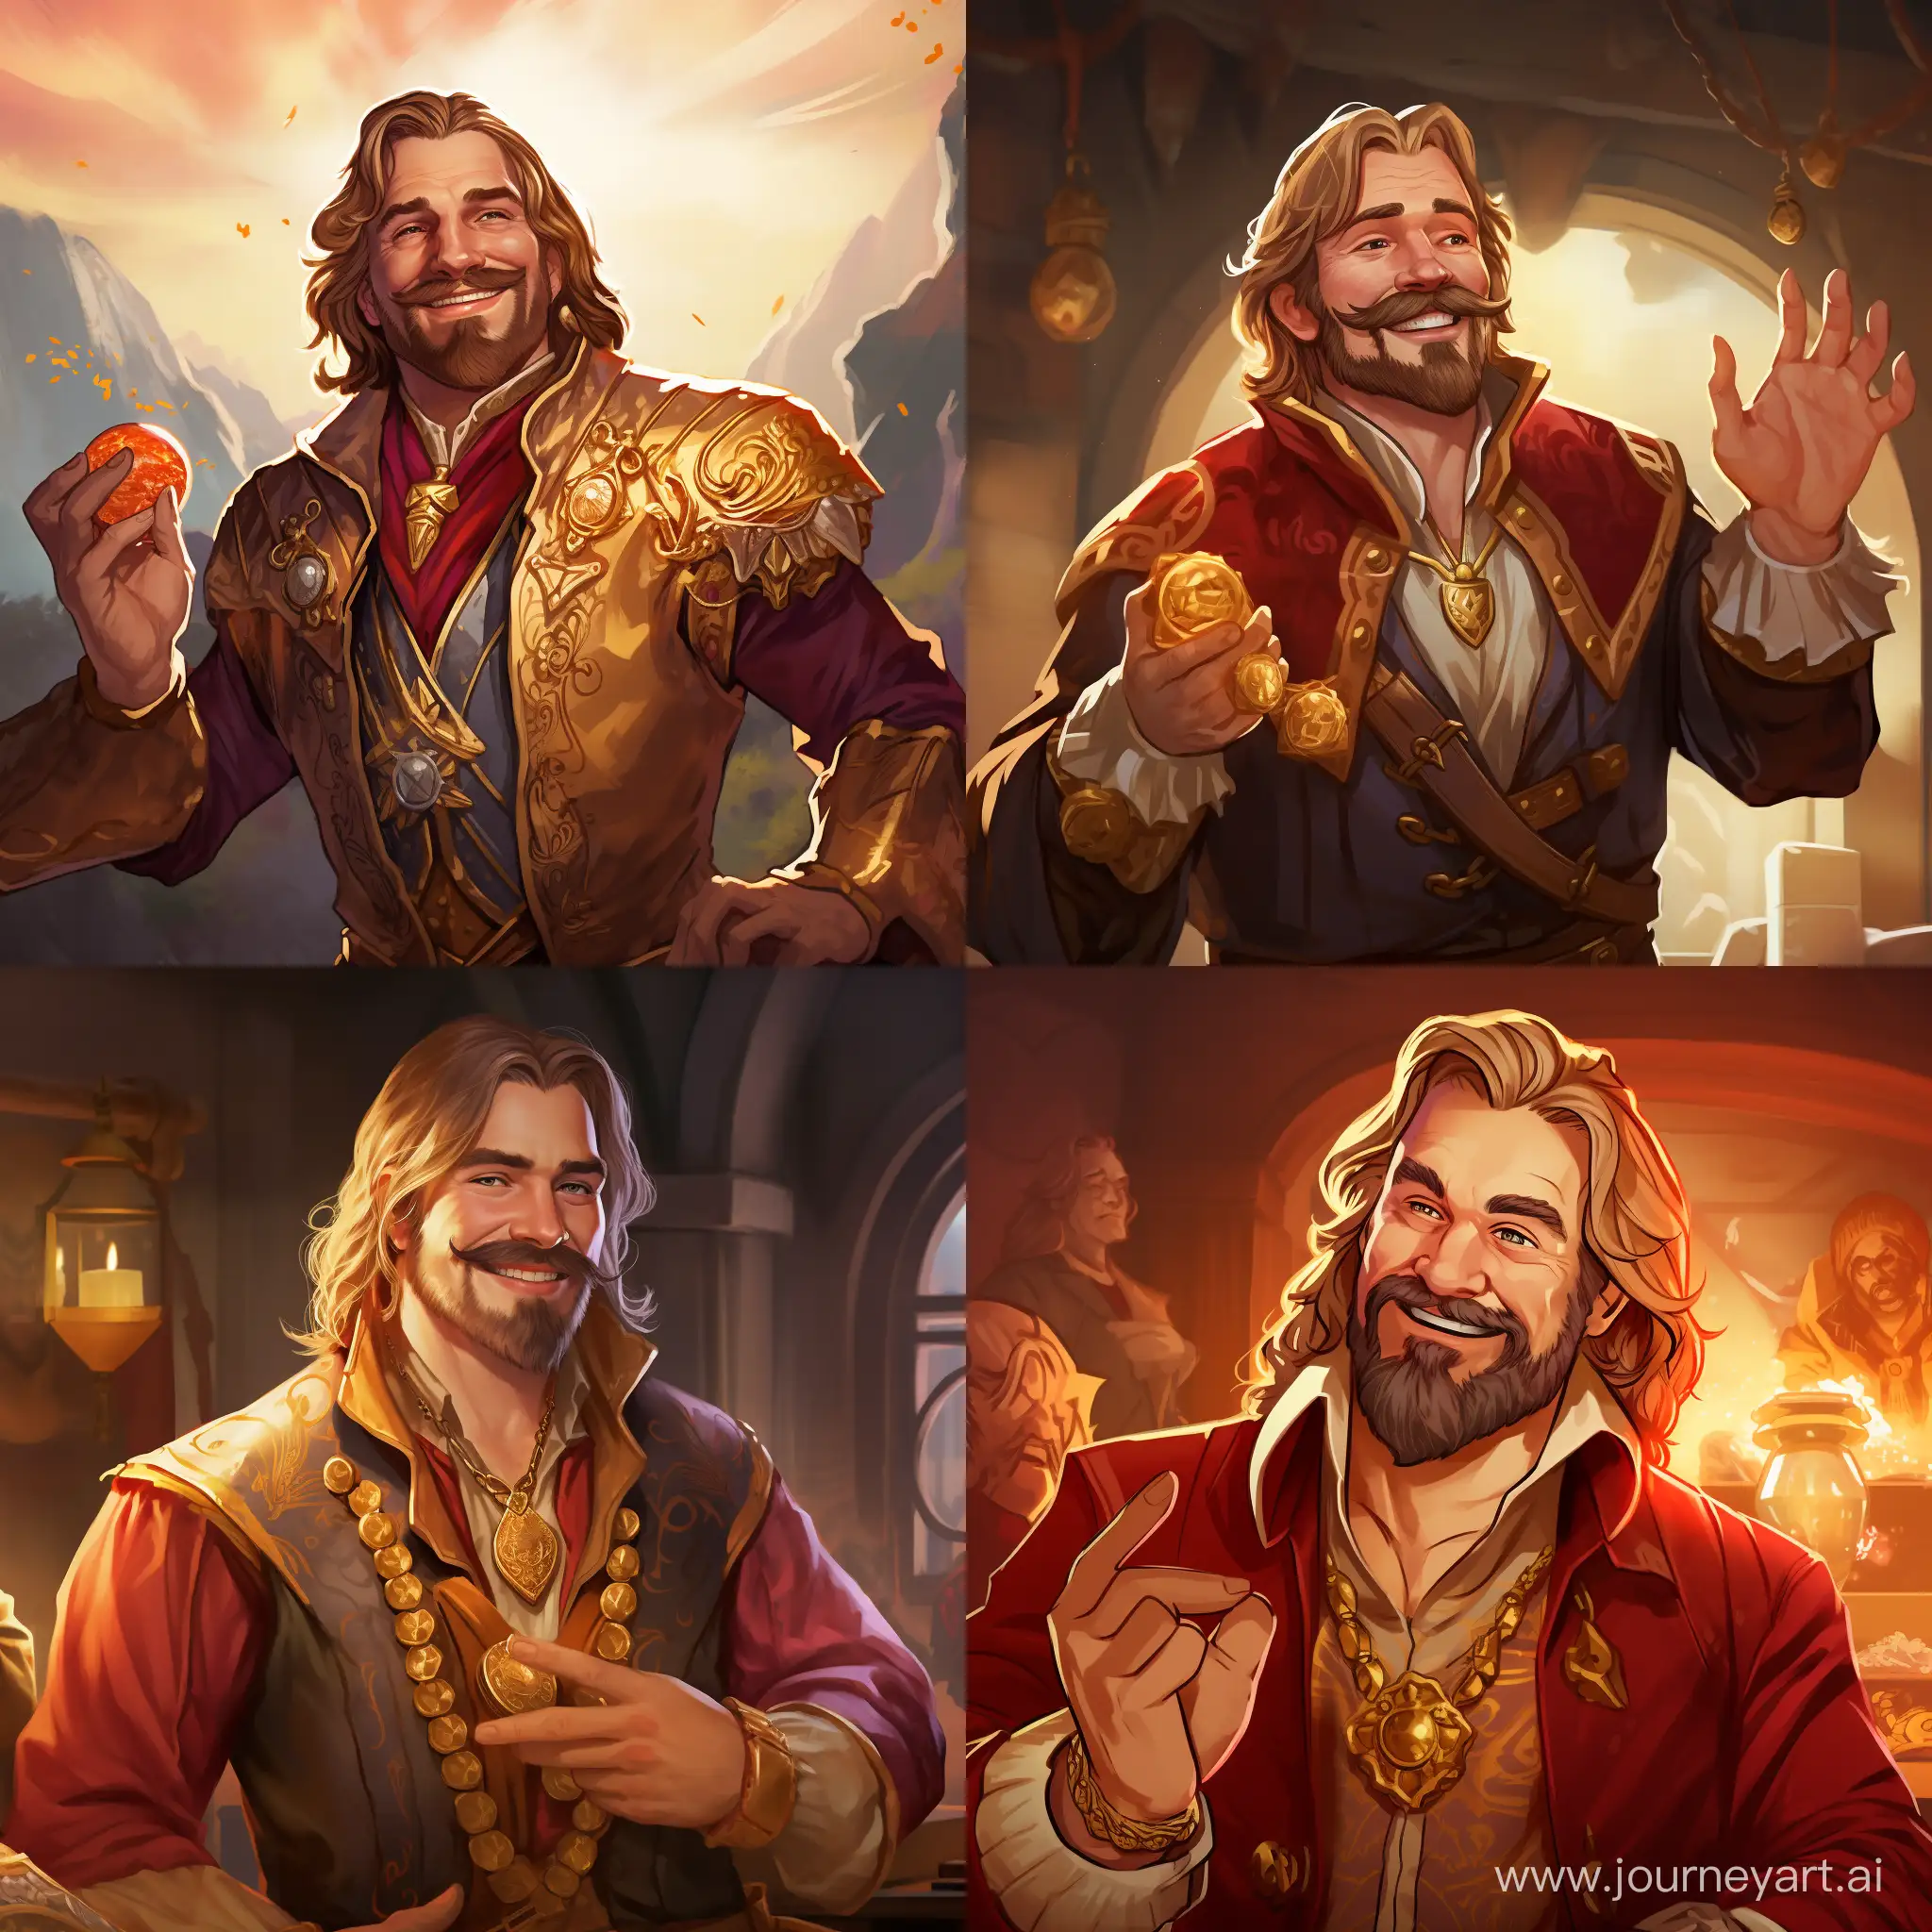 Draw me a concept art of a Viking trader who has long blond hair and a long beard with a mustache. 
He is 35 years old and looks young. He holds a ruby in his hands. Almost every finger has a ring with a precious stone. He is dressed in expensive clothes and wears gold rings with stones. Smiling. In the background, people reach out to him with their hands as if to God